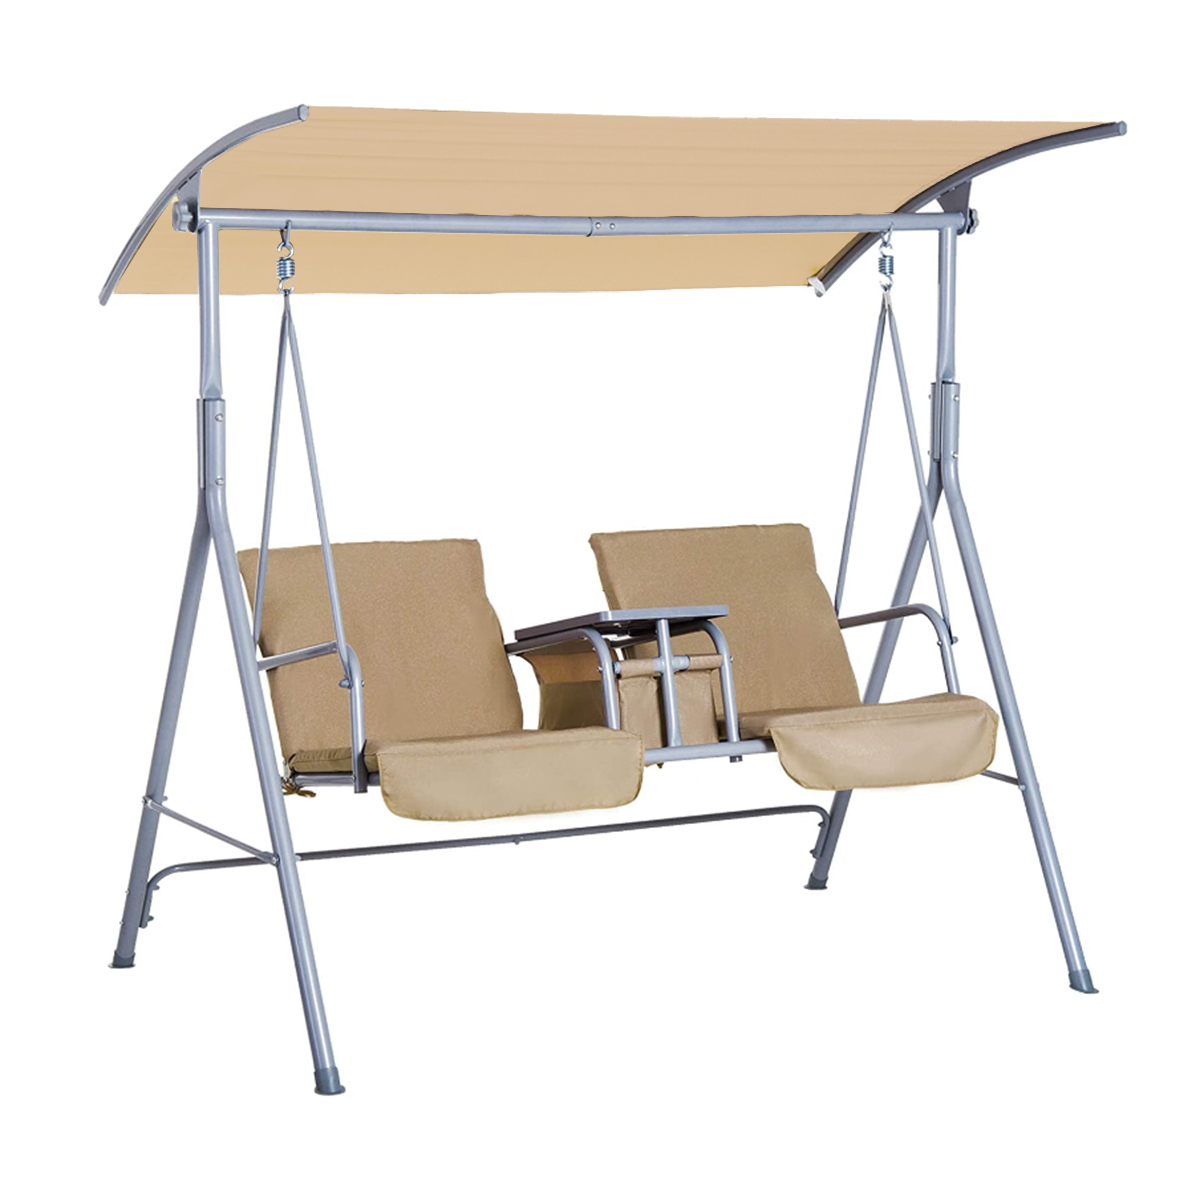 Replacement Canopy for Outsunny 2 Person Swing - RipLock 350